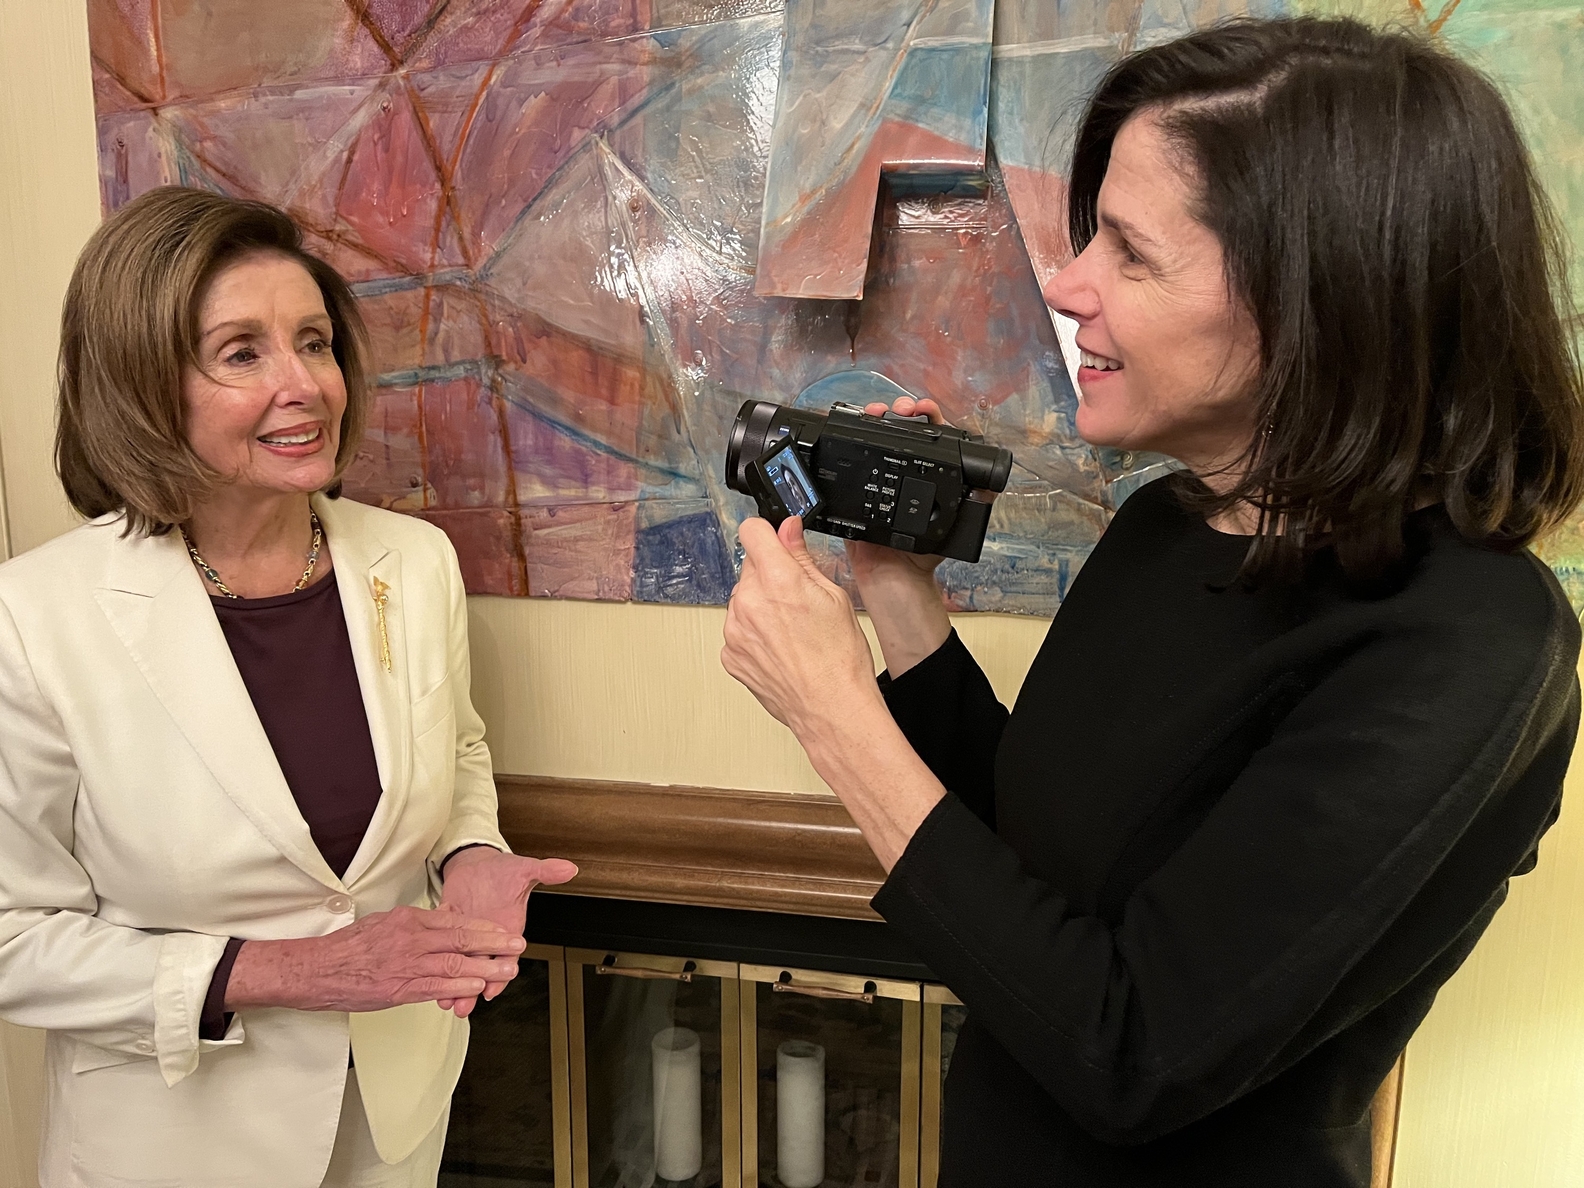 Trailer Watch: Alexandra Pelosi’s “Pelosi within the Home” Provides Intimate Have a look at Nancy Pelosi’s Life in Politics